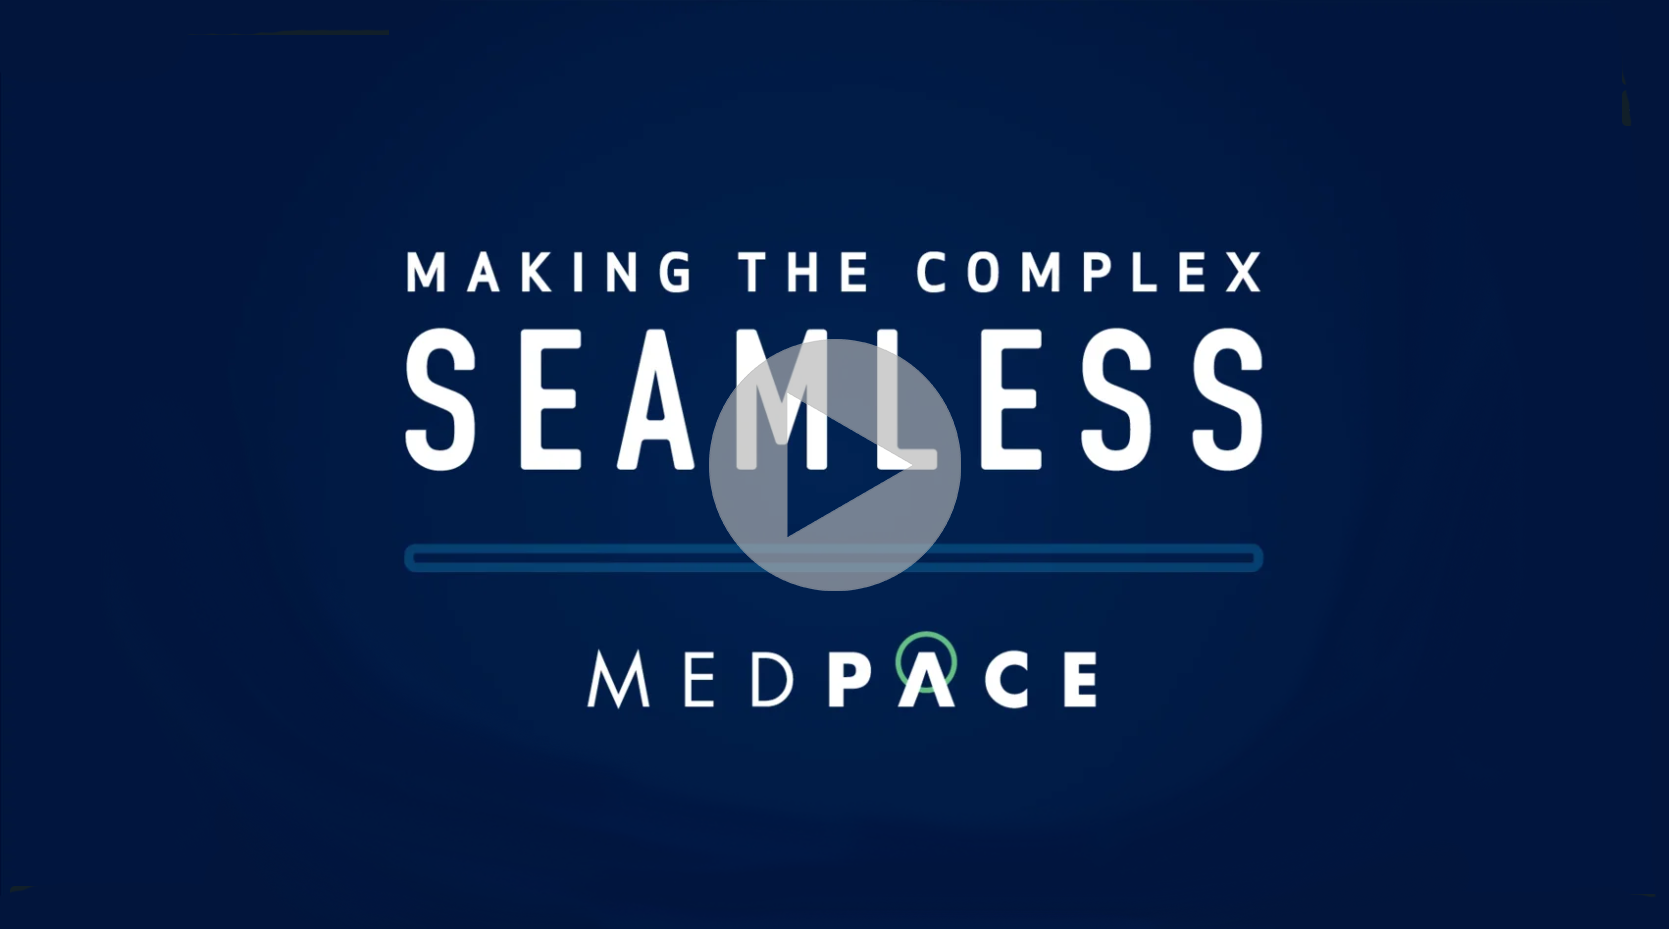 Making the complex seamless